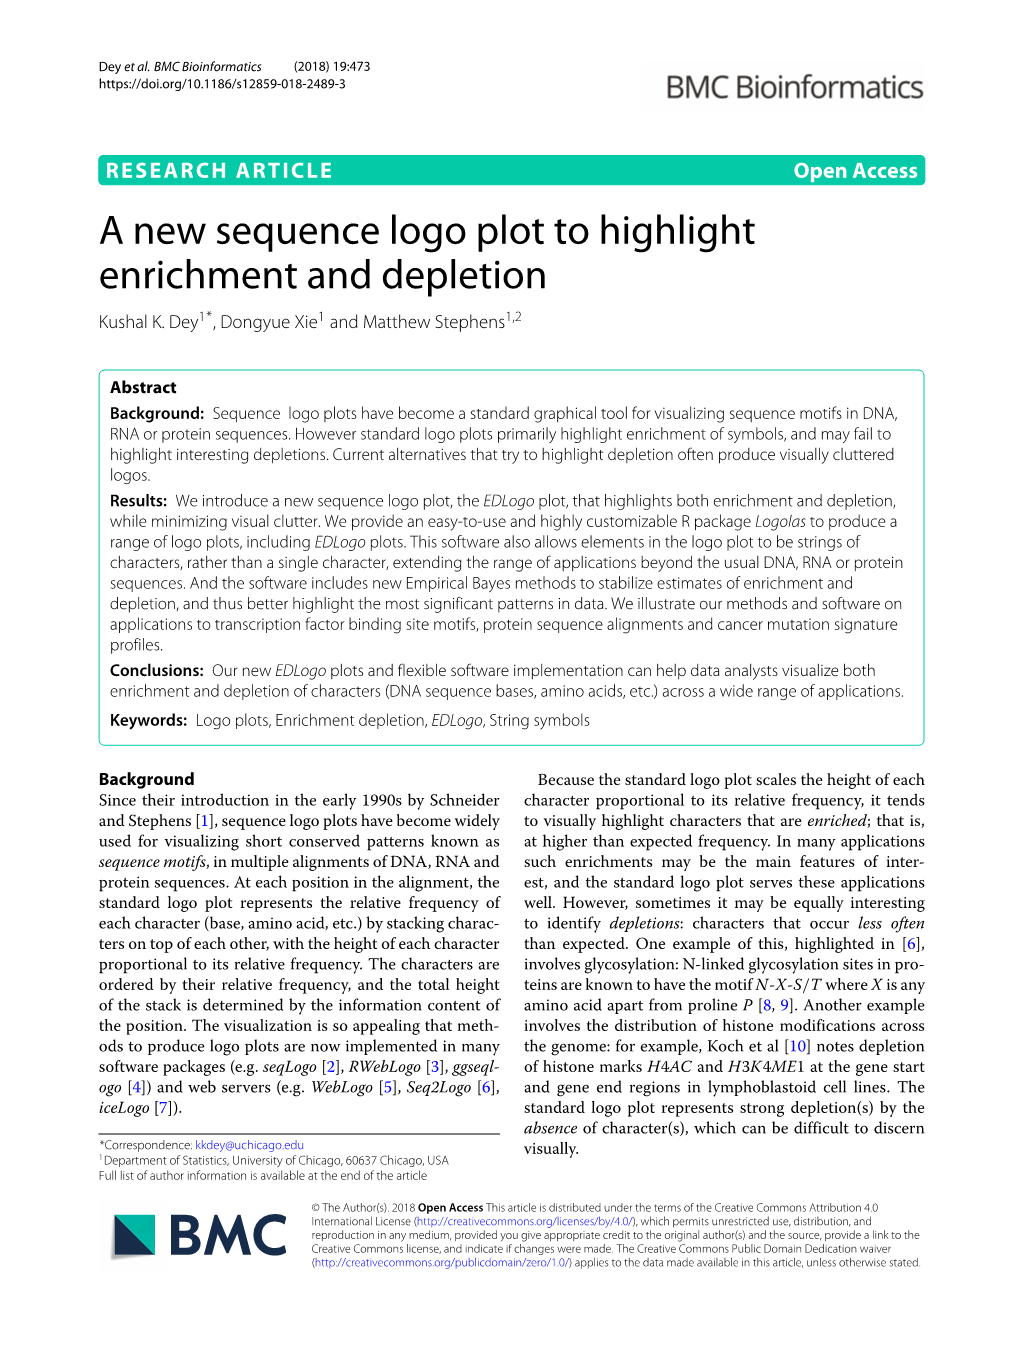 A New Sequence Logo Plot to Highlight Enrichment and Depletion Kushal K